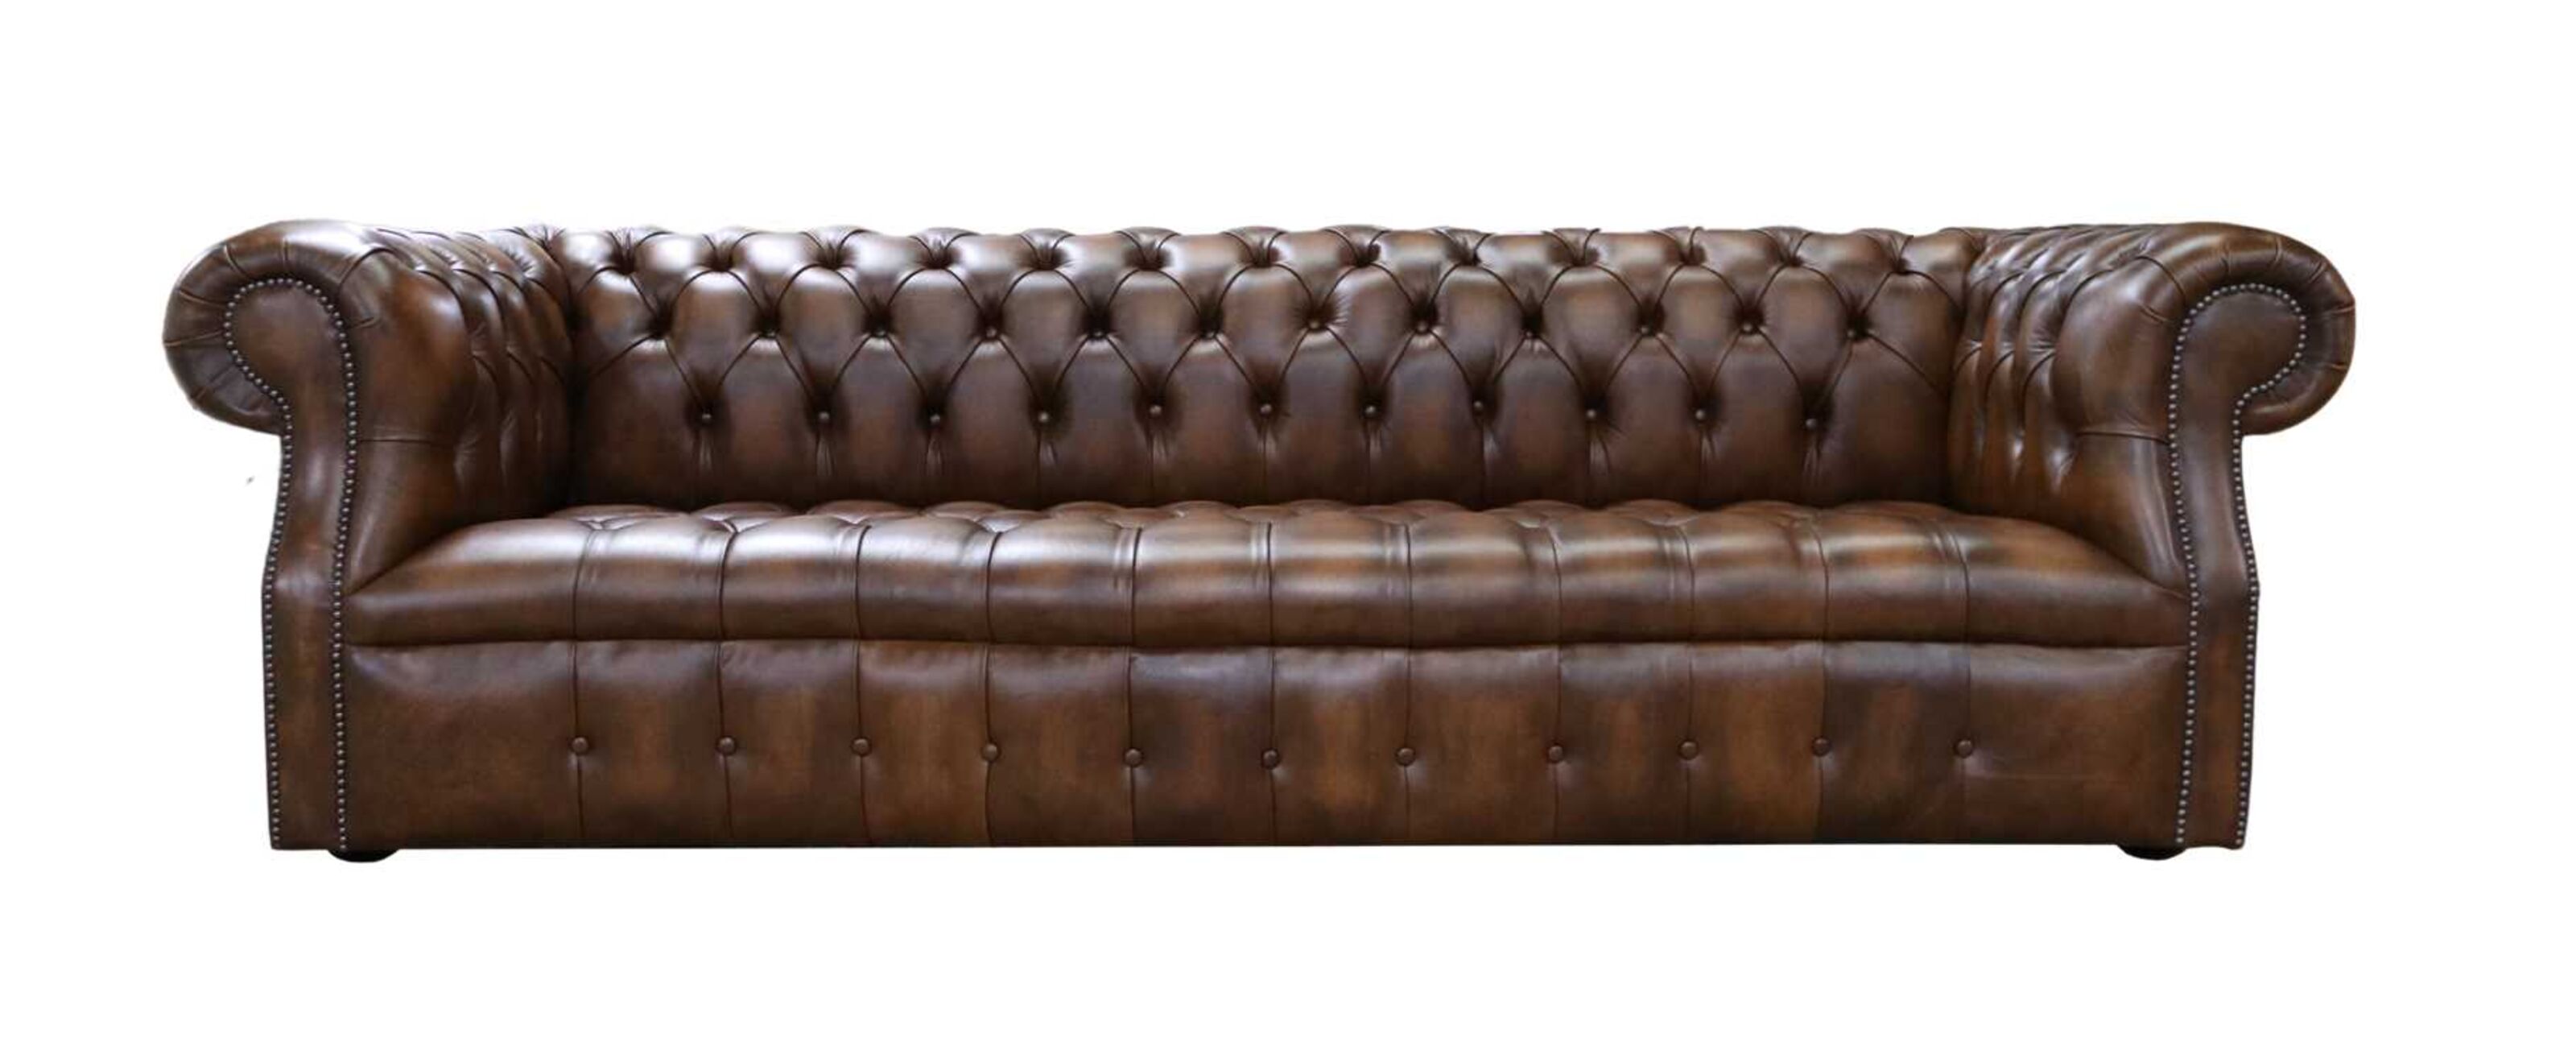 Luxurious Chesterfield Sofas in Kuala Lumpur  %Post Title